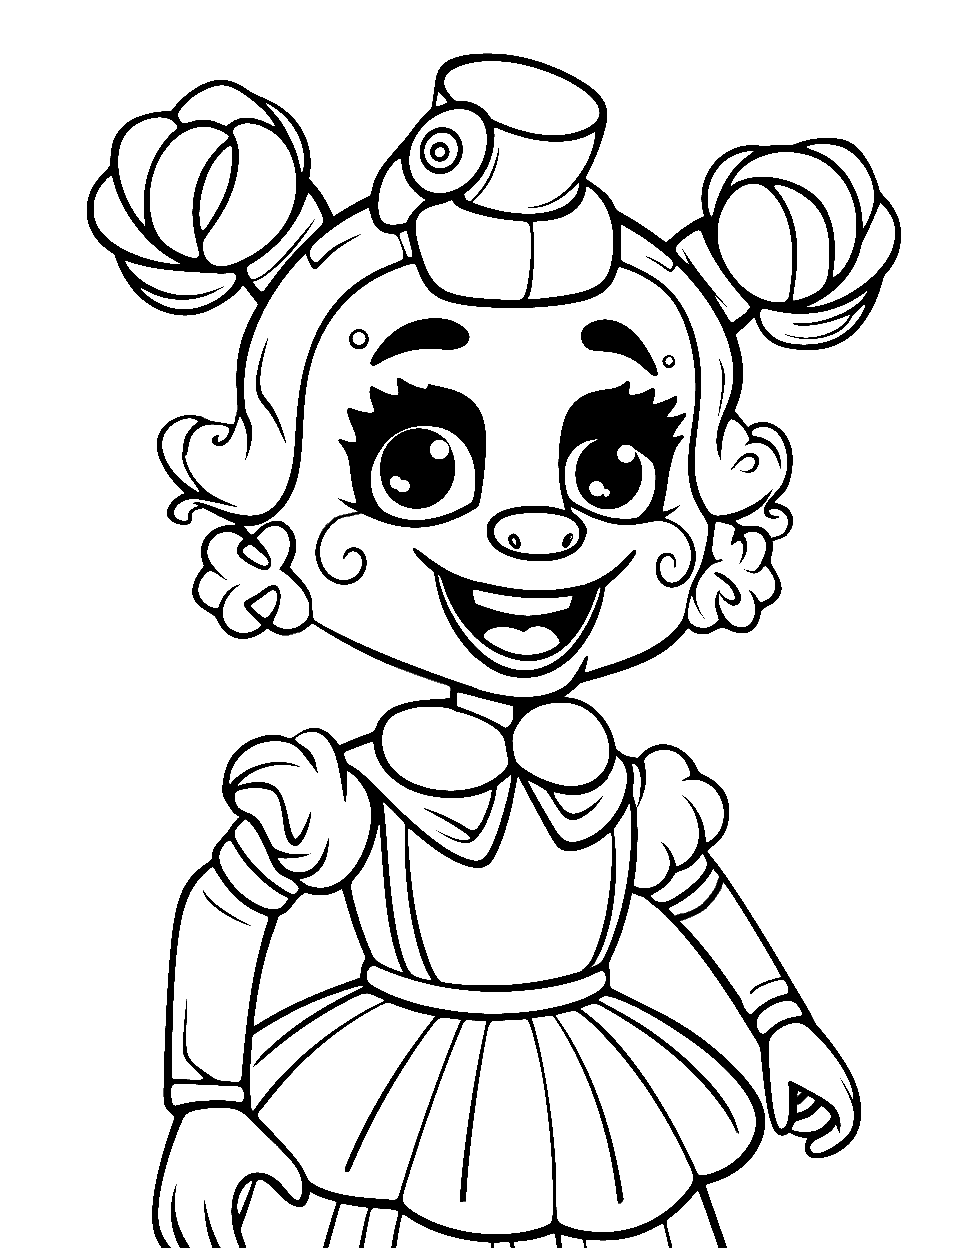 Sister Location Surprise Five Nights at Freddys Coloring Page - A character from Sister Location smiling warmly.